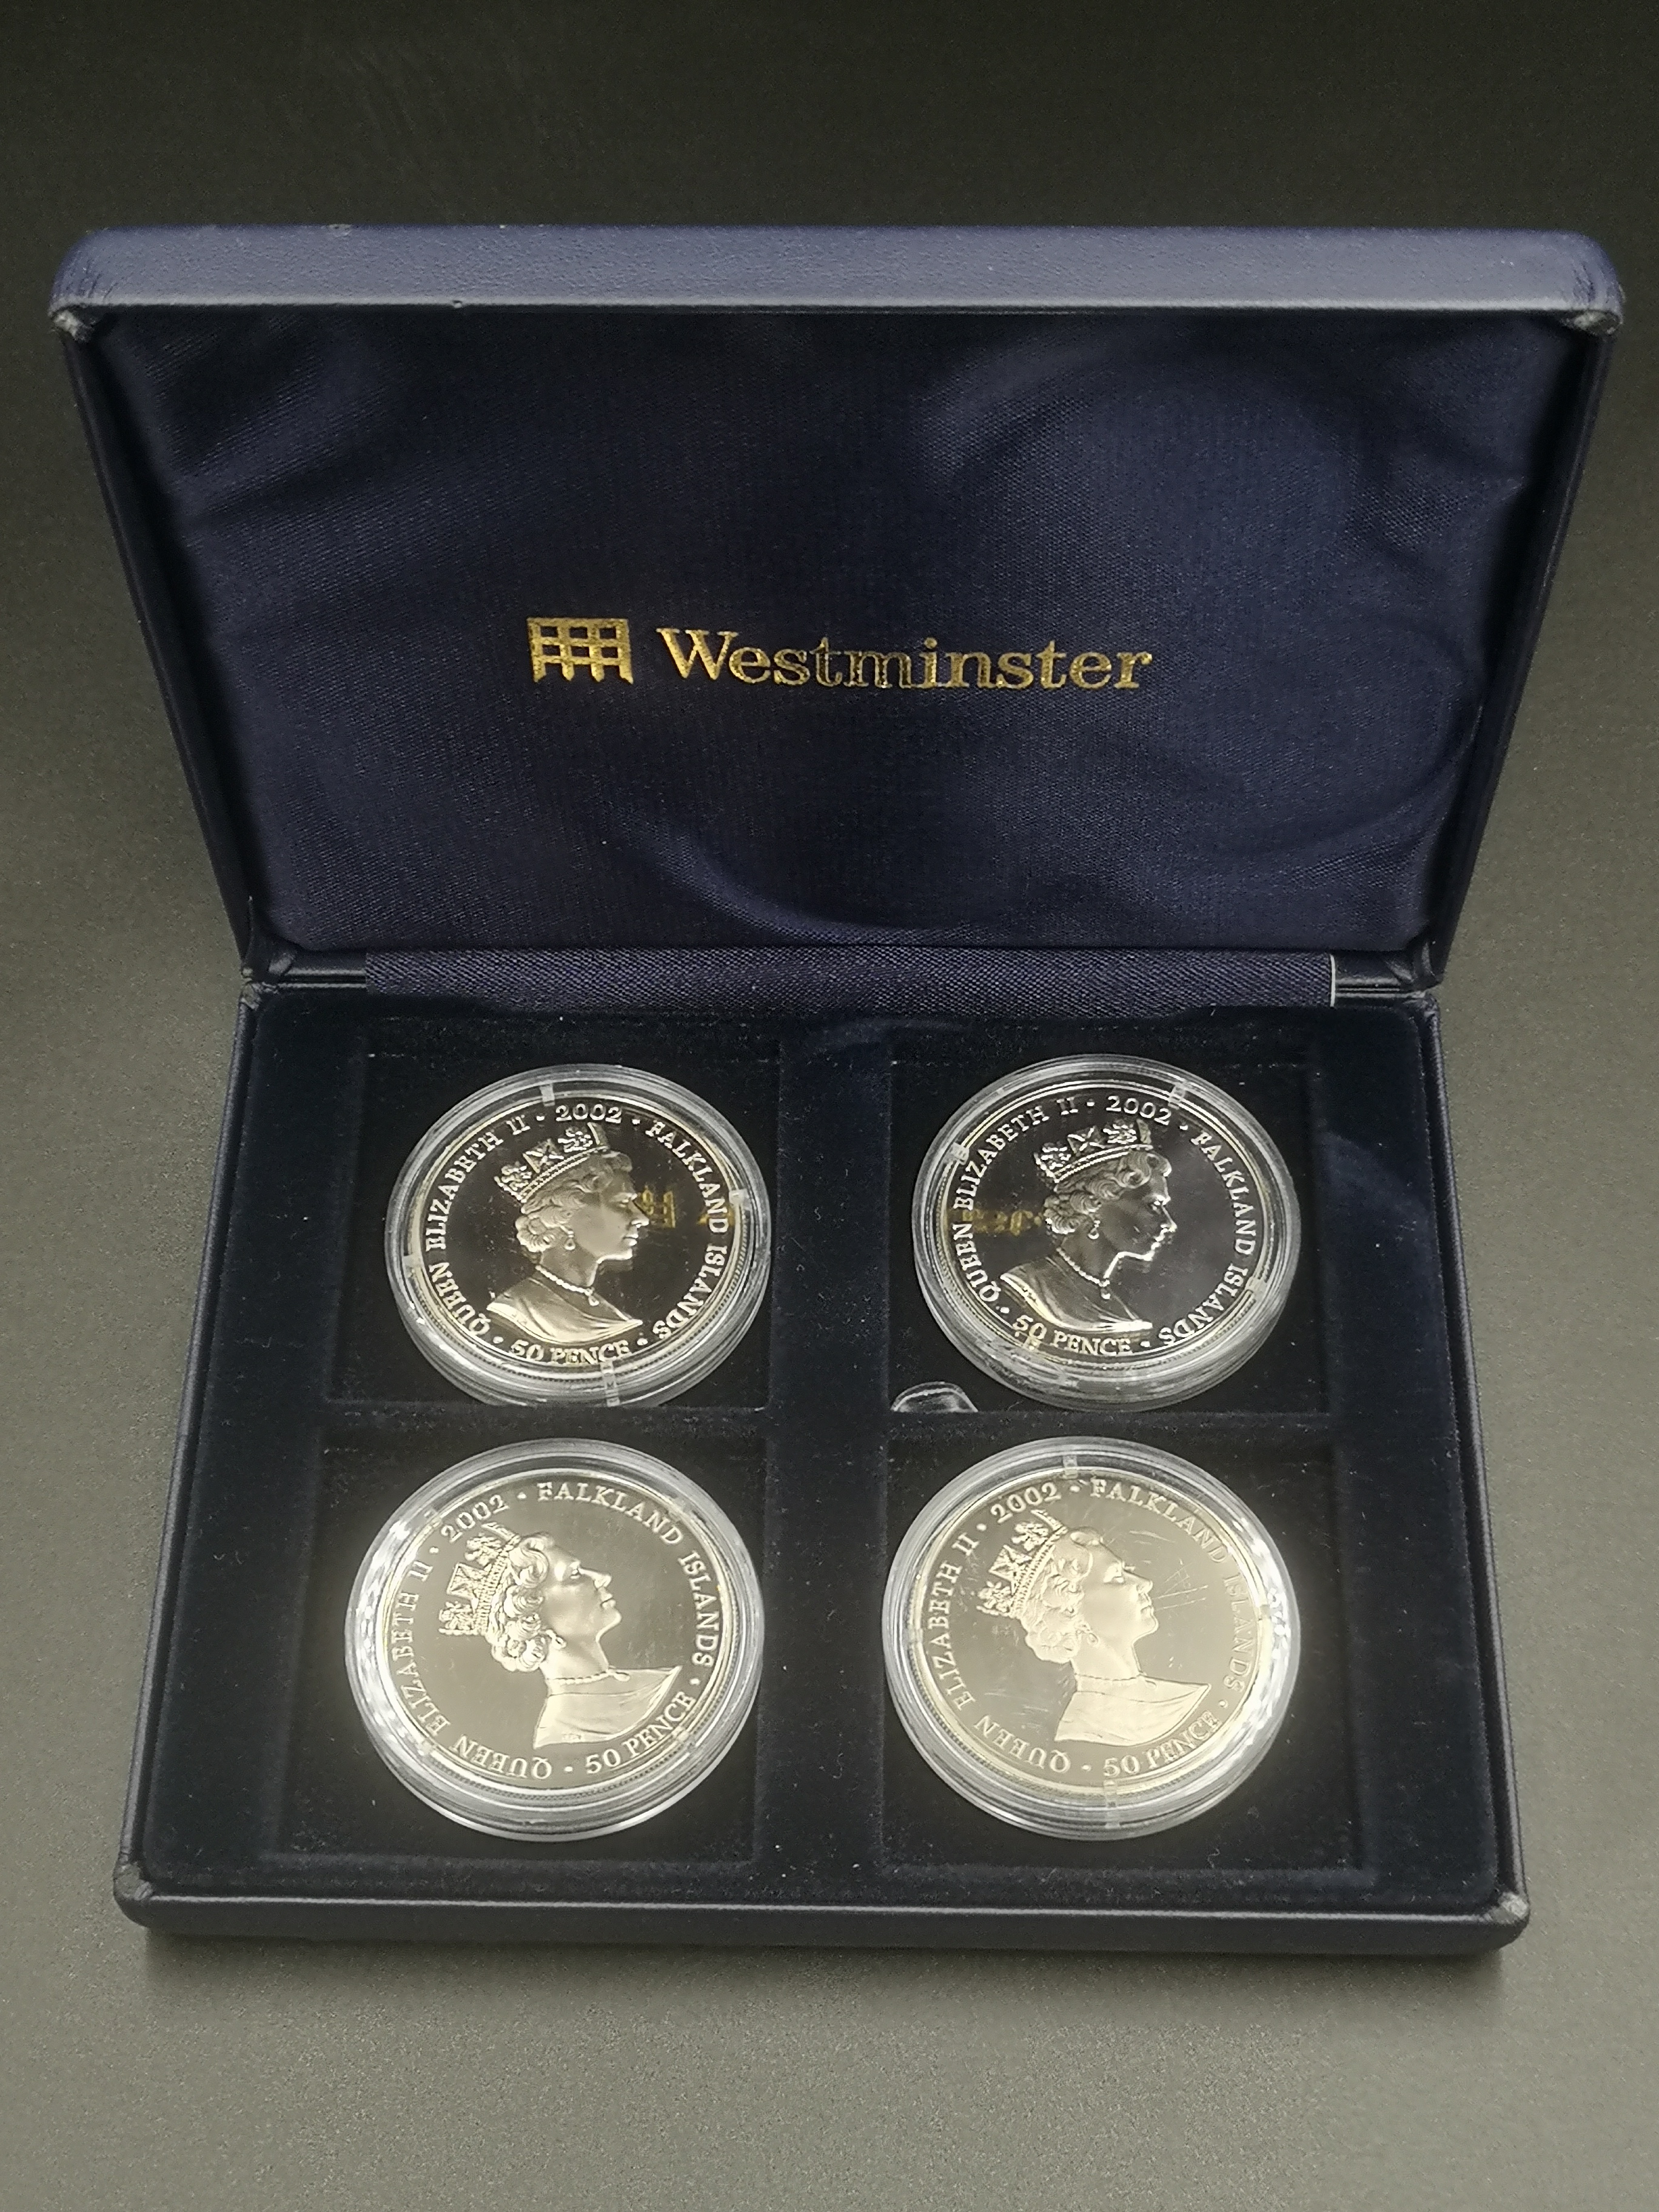 Westminster Diamond Wedding silver proof pair and other coins - Image 4 of 4